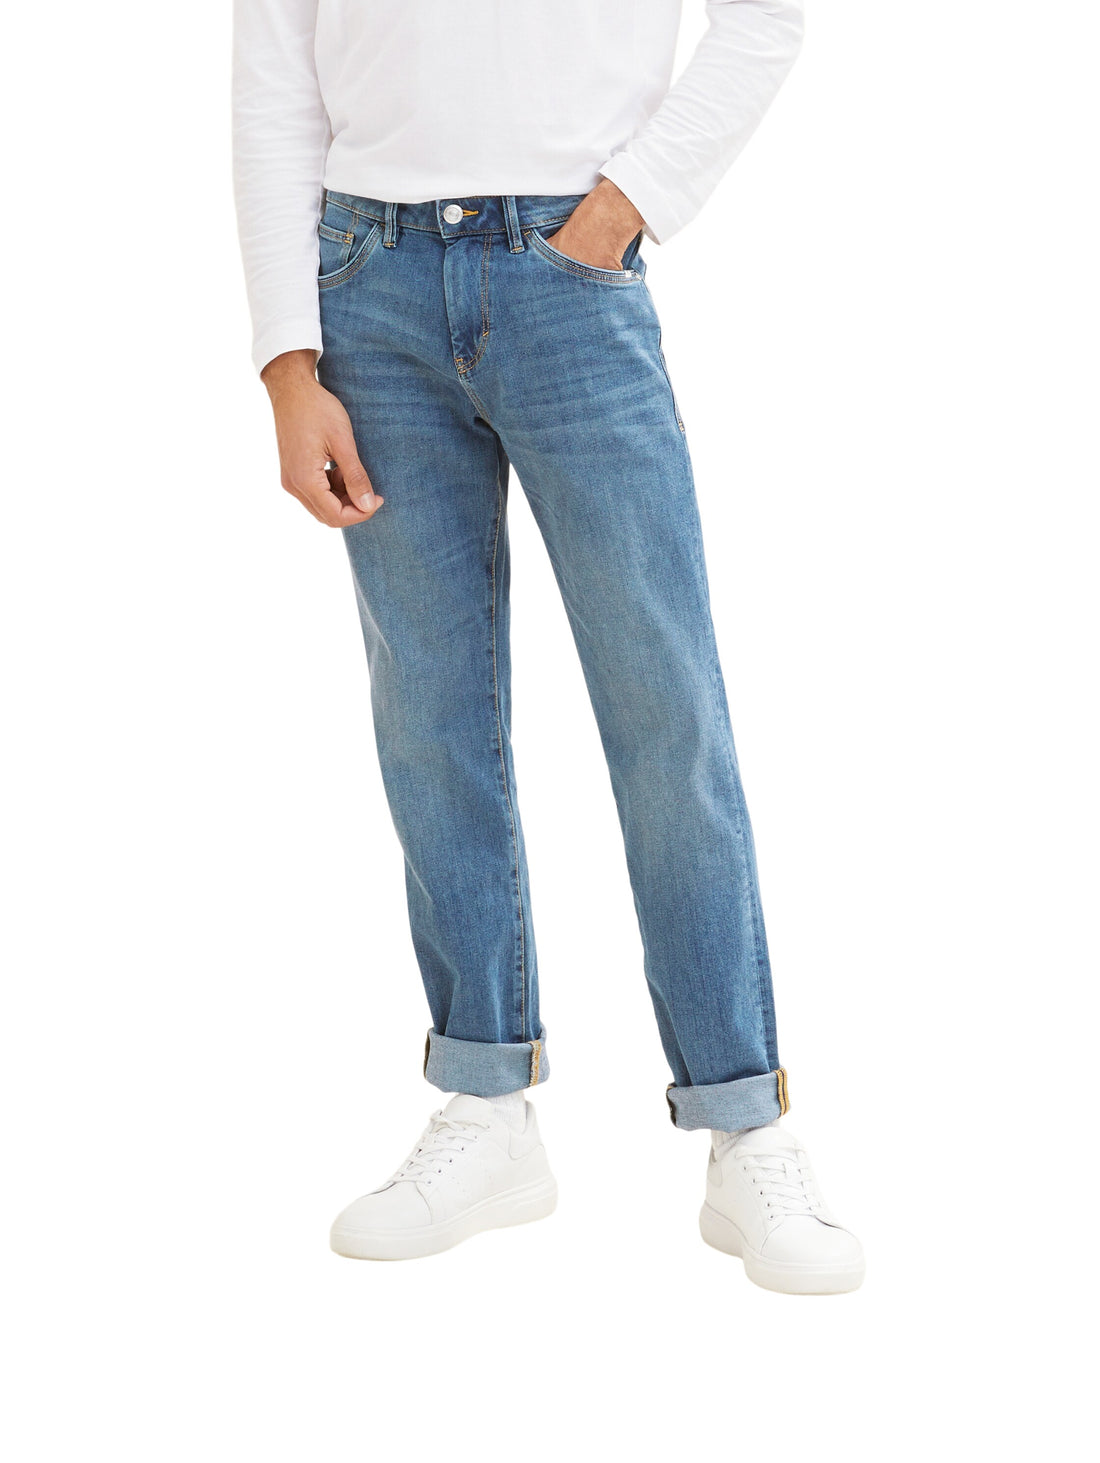 Tinted Blue Standard Fit Jeans